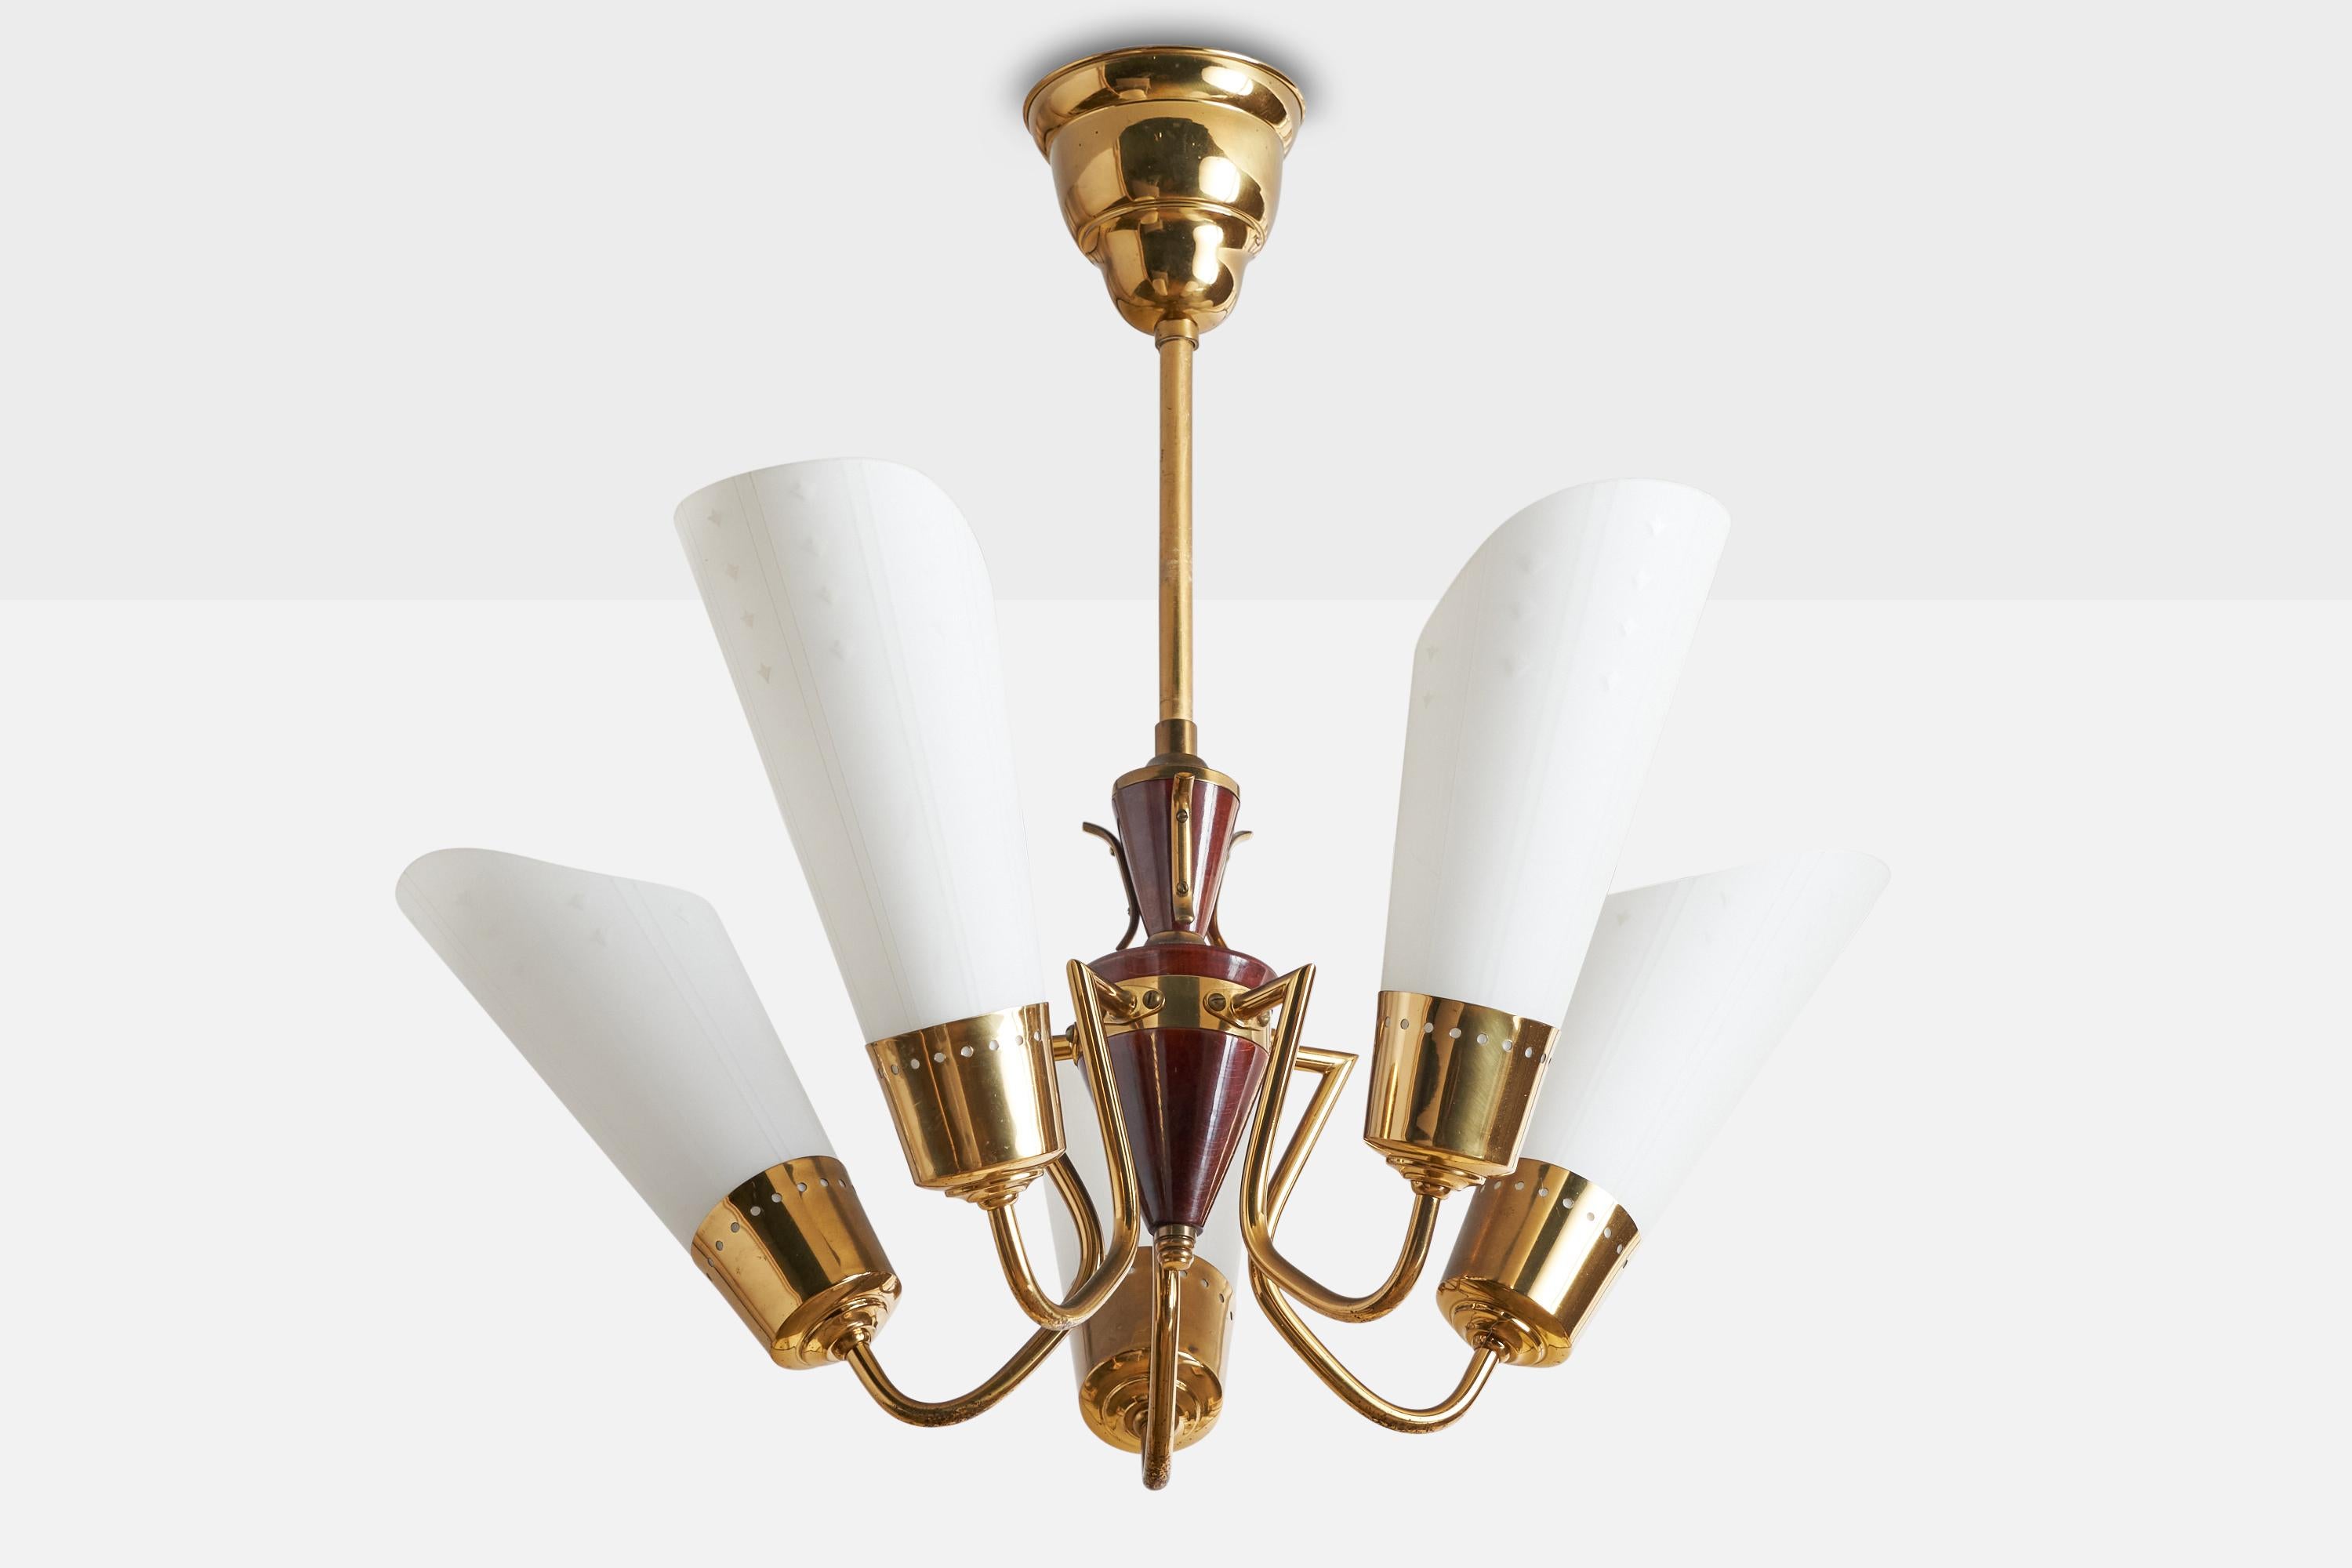 A brass, stained wood and glass chandelier designed and produced in Sweden, c. 1940s.

Dimensions of canopy (inches): 3.5”  H x 4” Diameter
Socket takes standard E-14 bulbs. 5 sockets.There is no maximum wattage stated on the fixture. All lighting